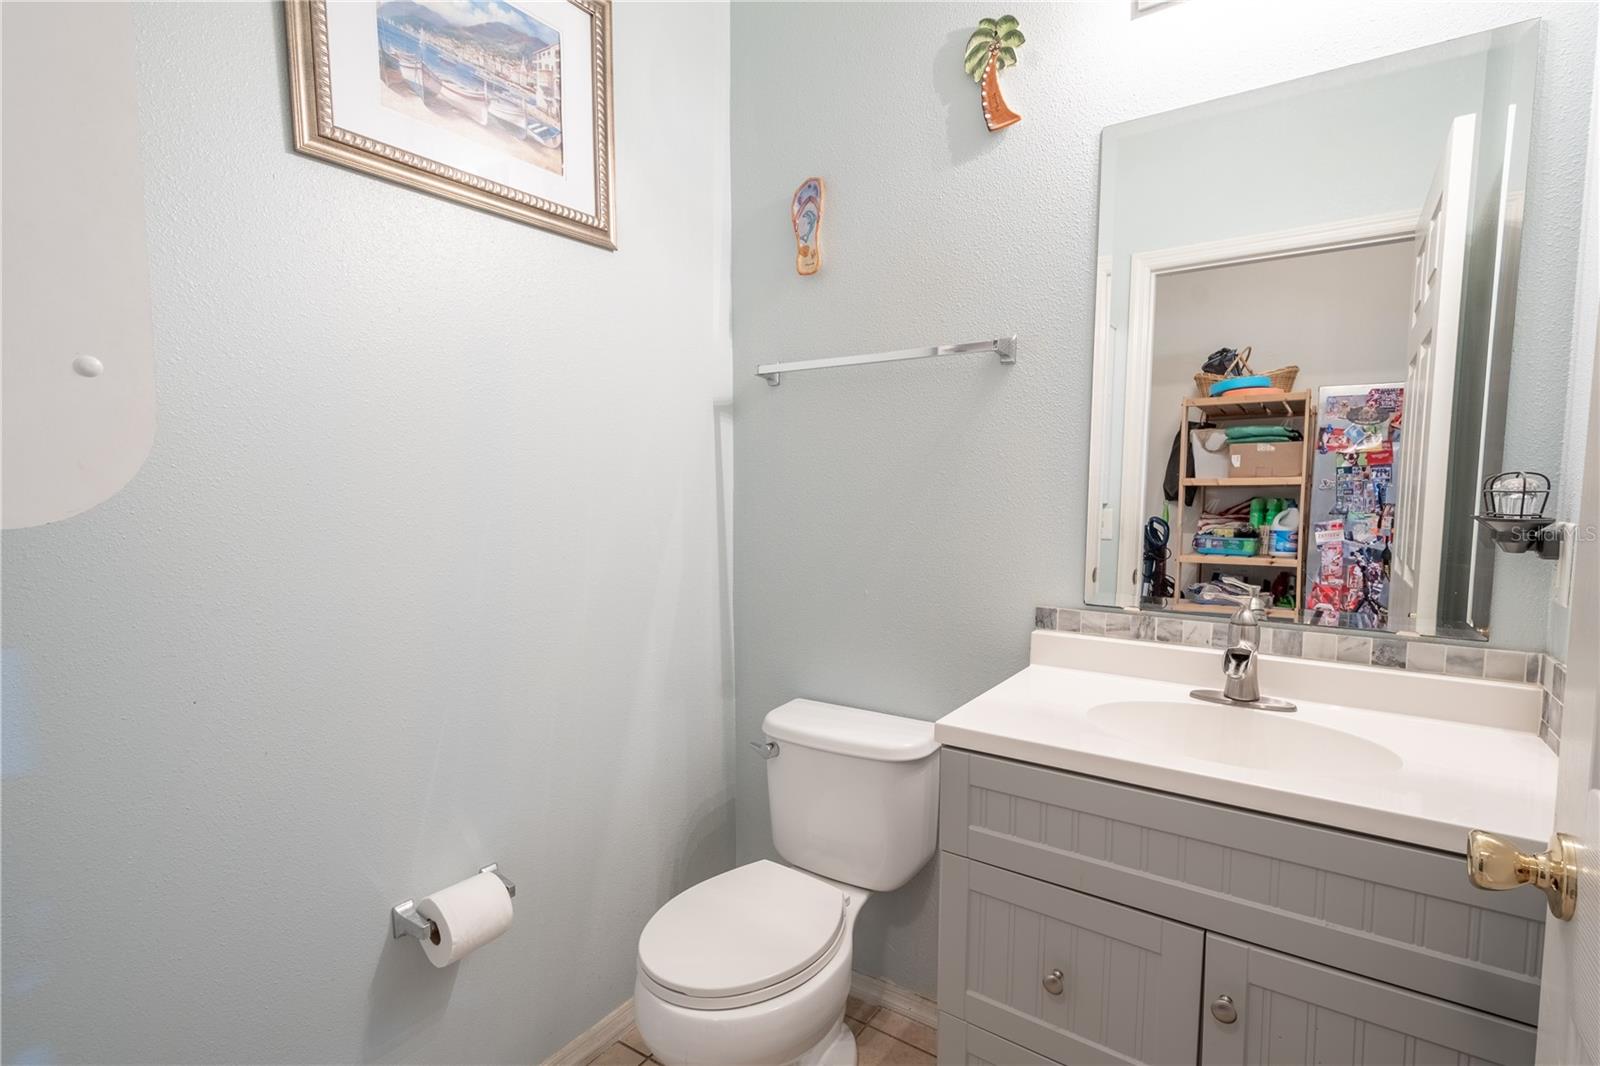 The first floor half bath is conveniently located and features a mirrored vanity with storage.